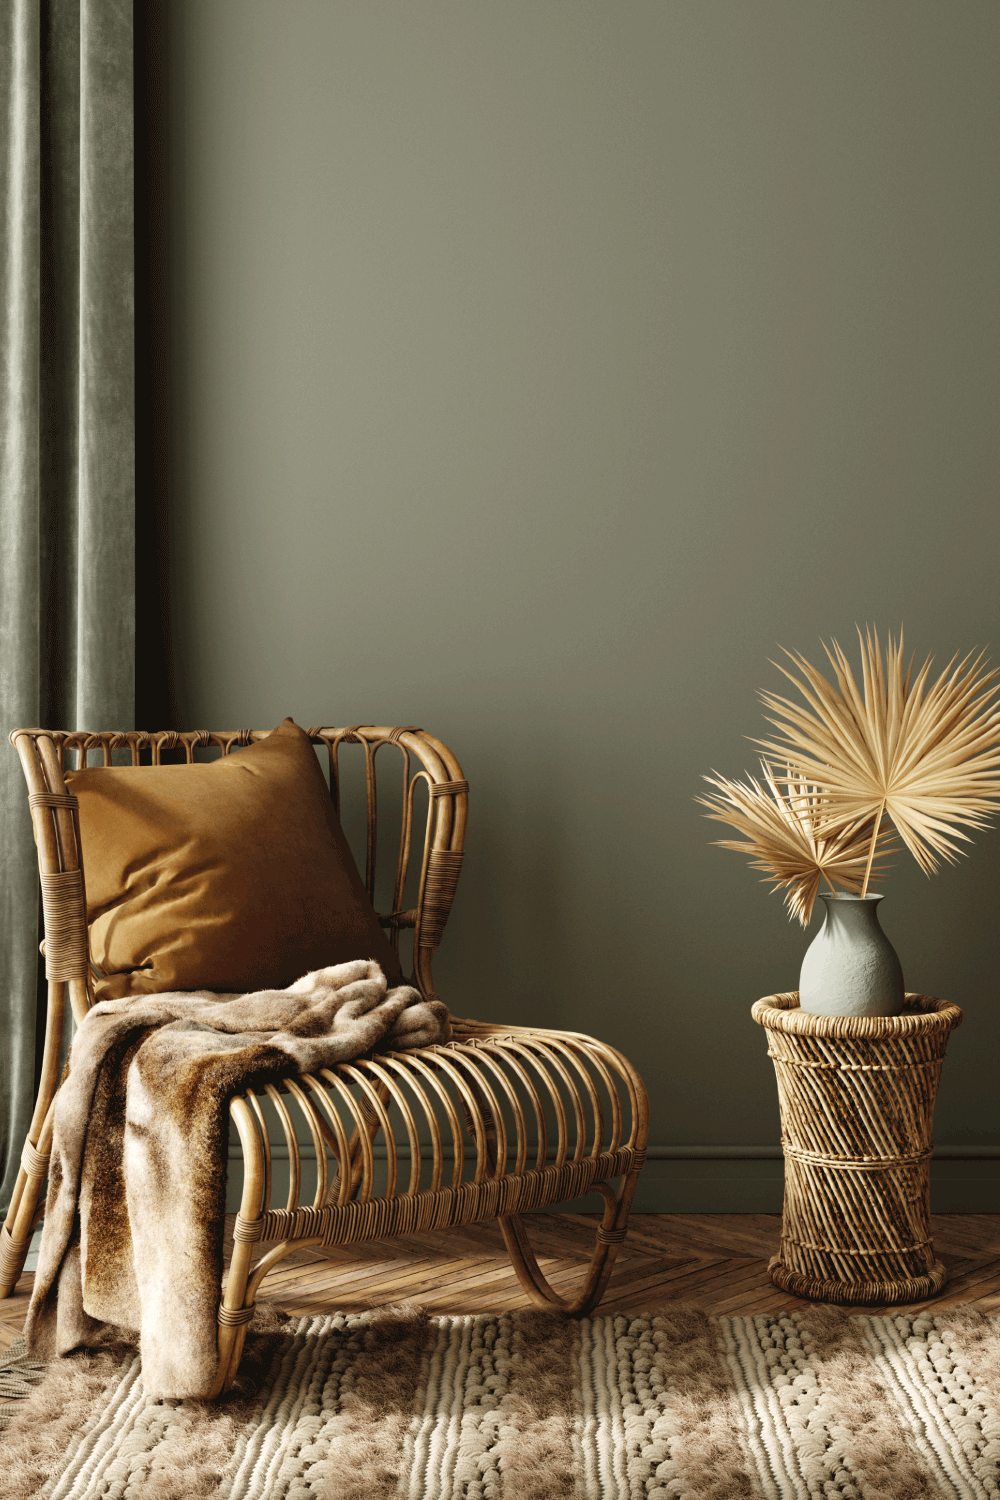 Modern dark green home interior with rattan furniture and dry palm leaves in vase. sage green accents